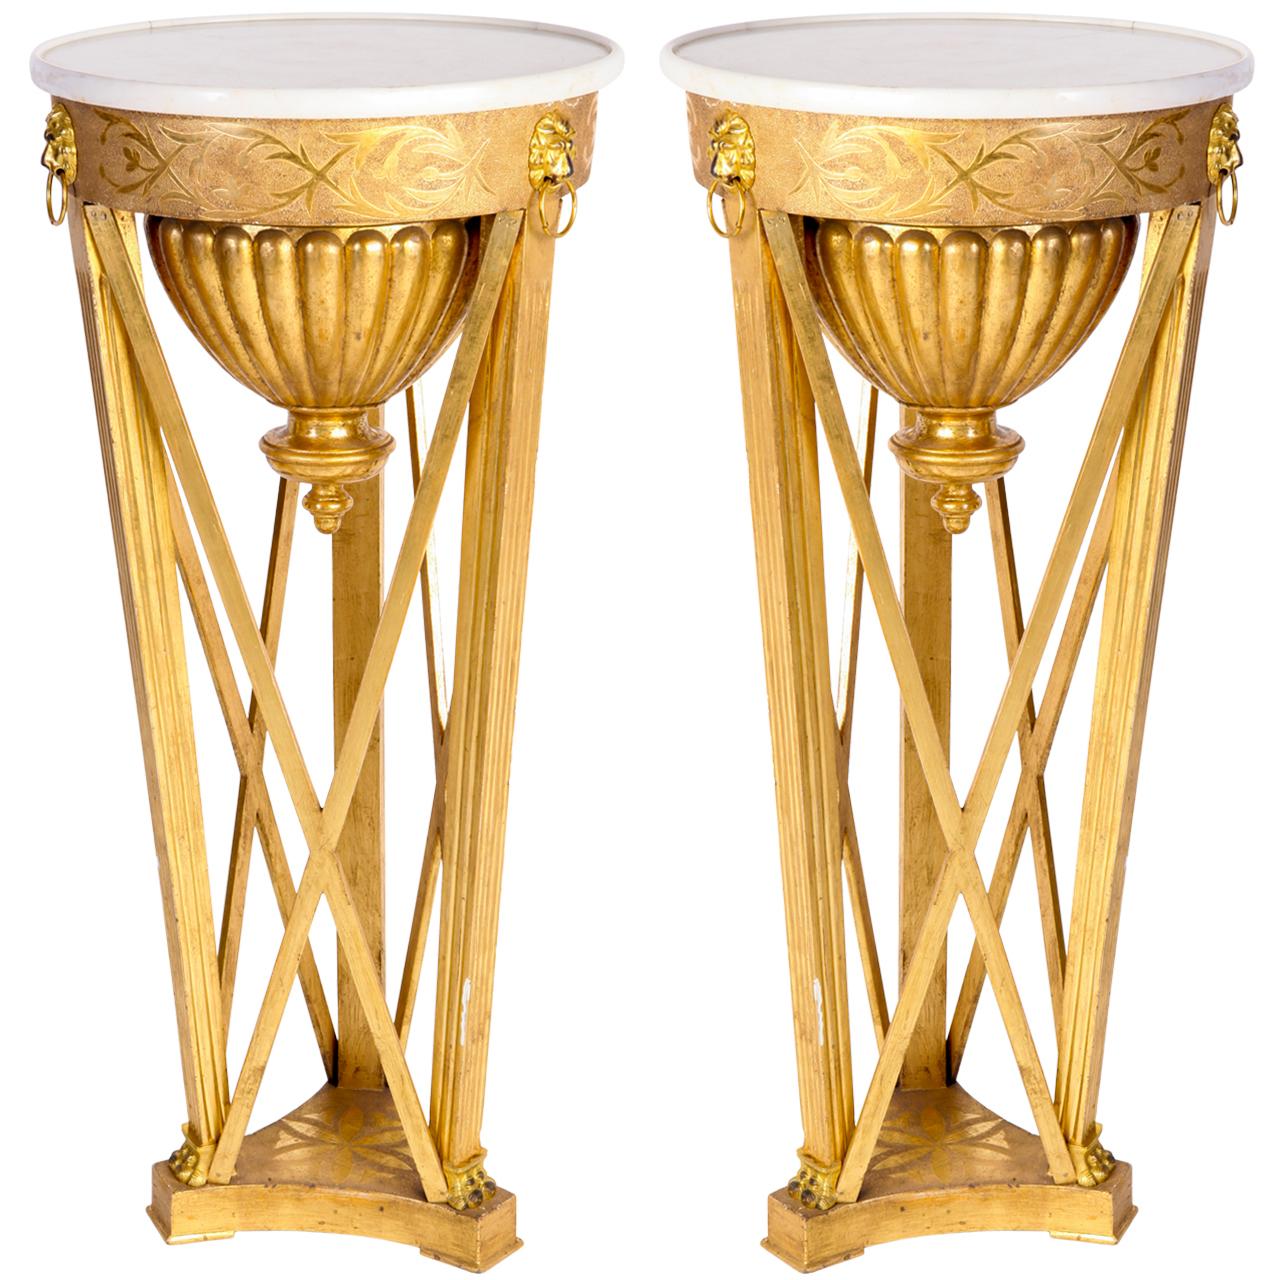 Very fine pair of Italian neoclassical guéridons.
In gilt-wood with a white marble-top and a gilt bronze mounted ornaments.
Available 3 pairs.
Provenance from an aristocratic Tuscany estate.